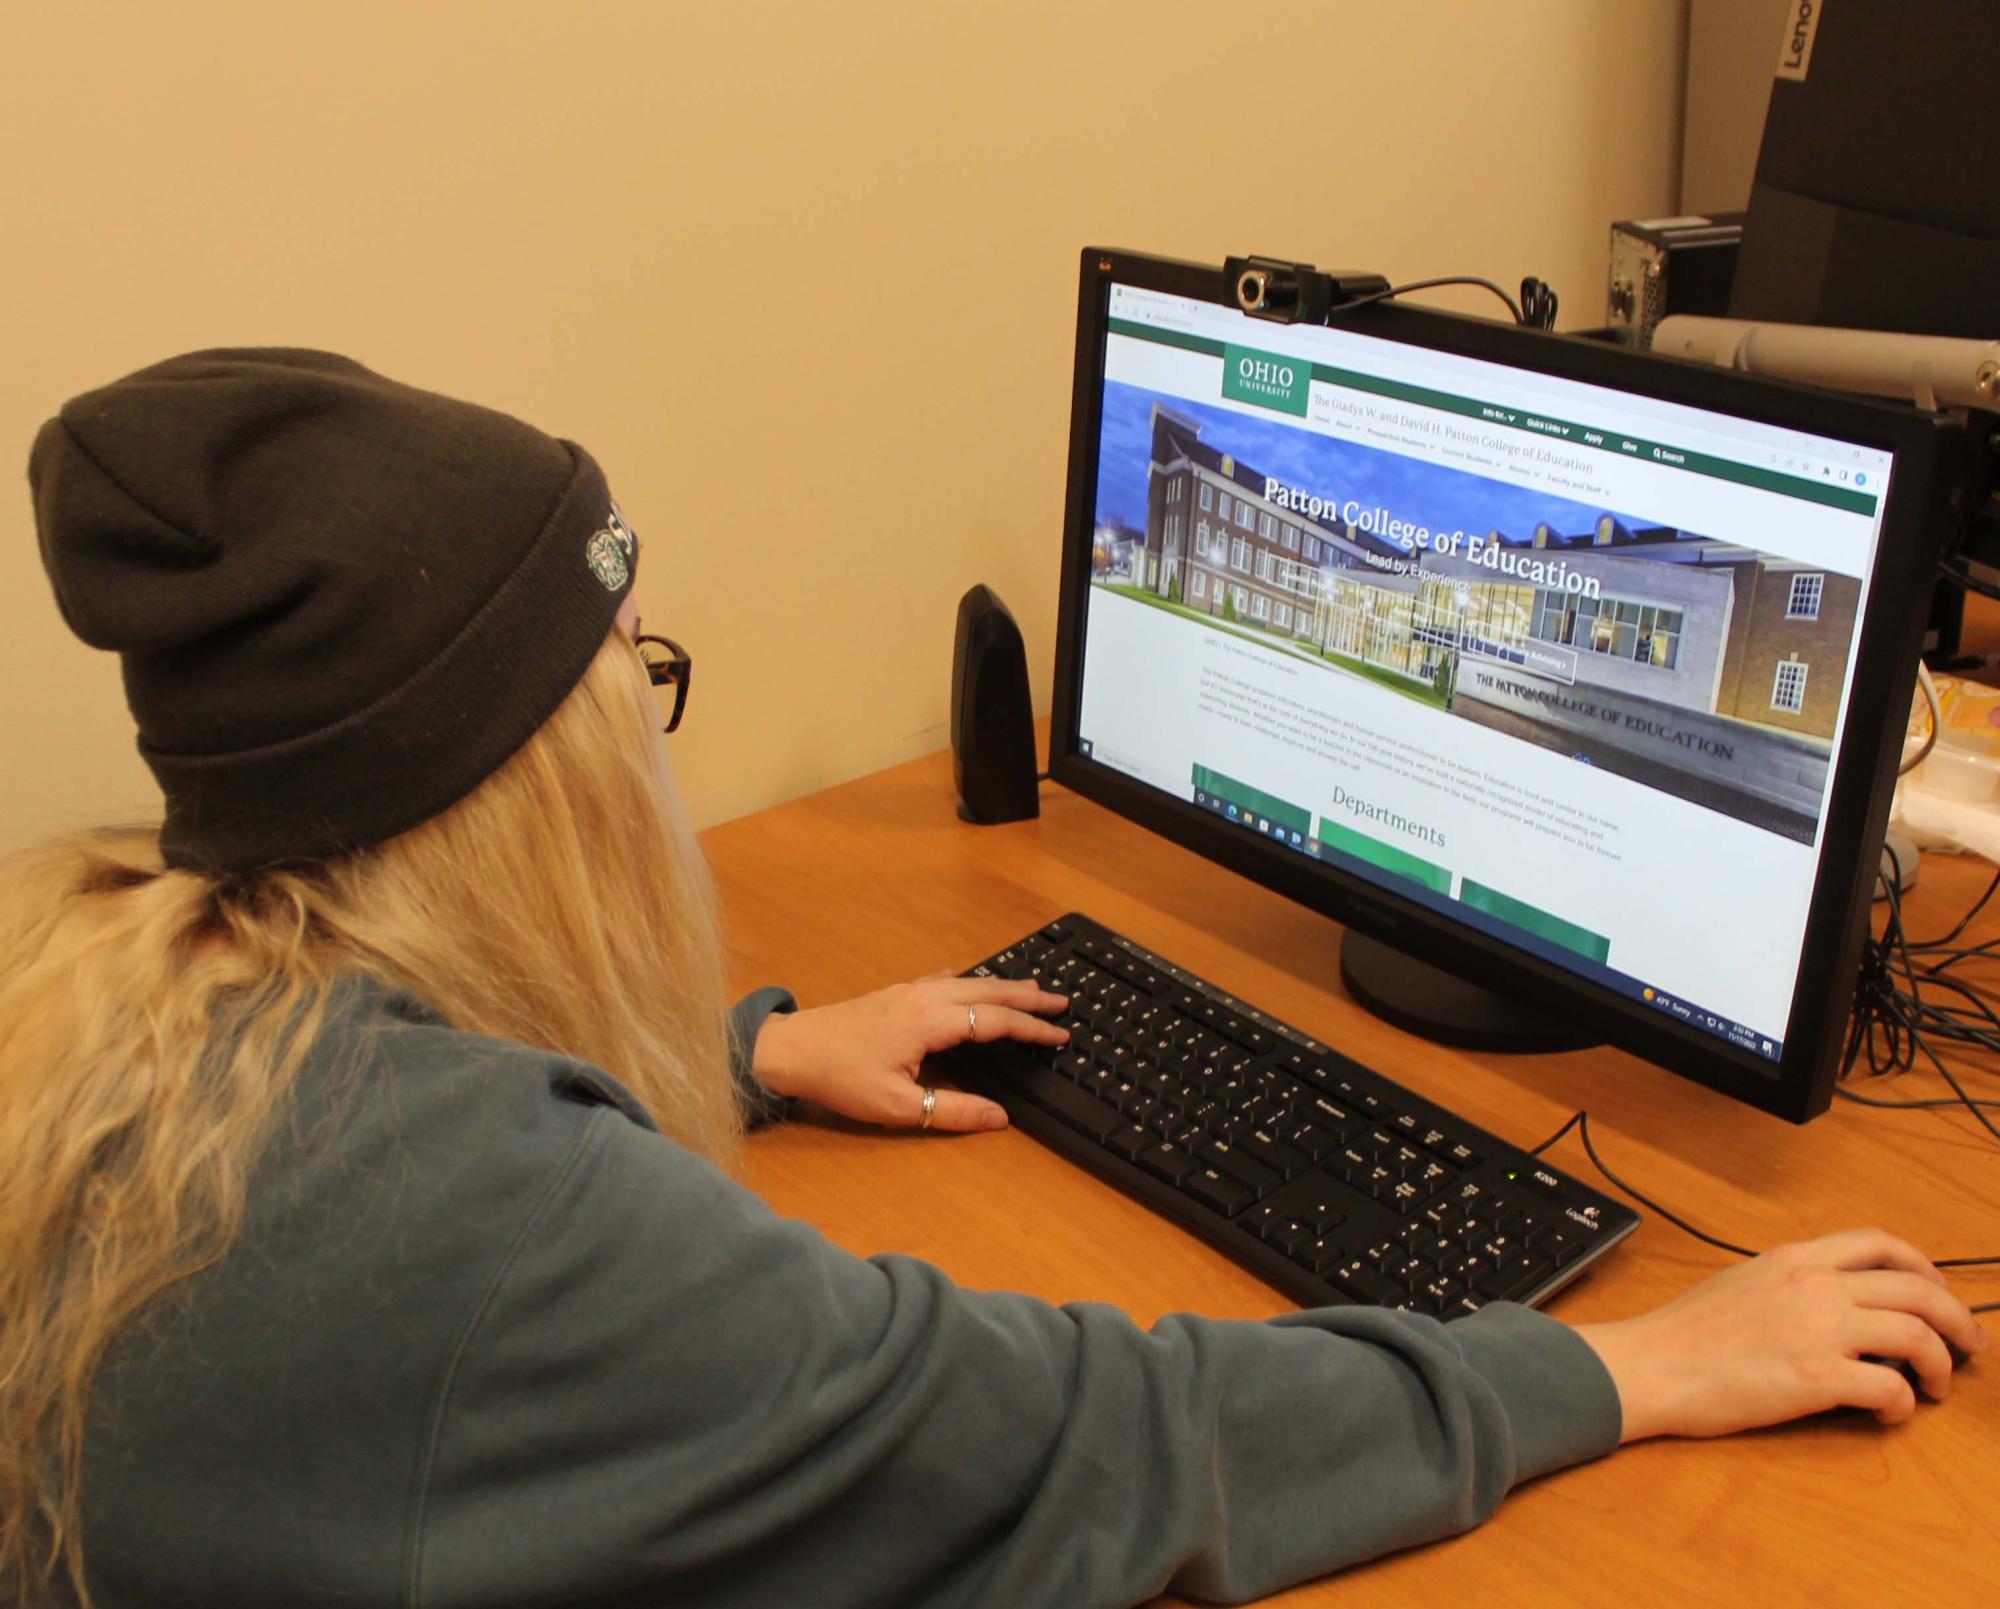 Student looking at the Patton College of Education homepage on a desktop computer